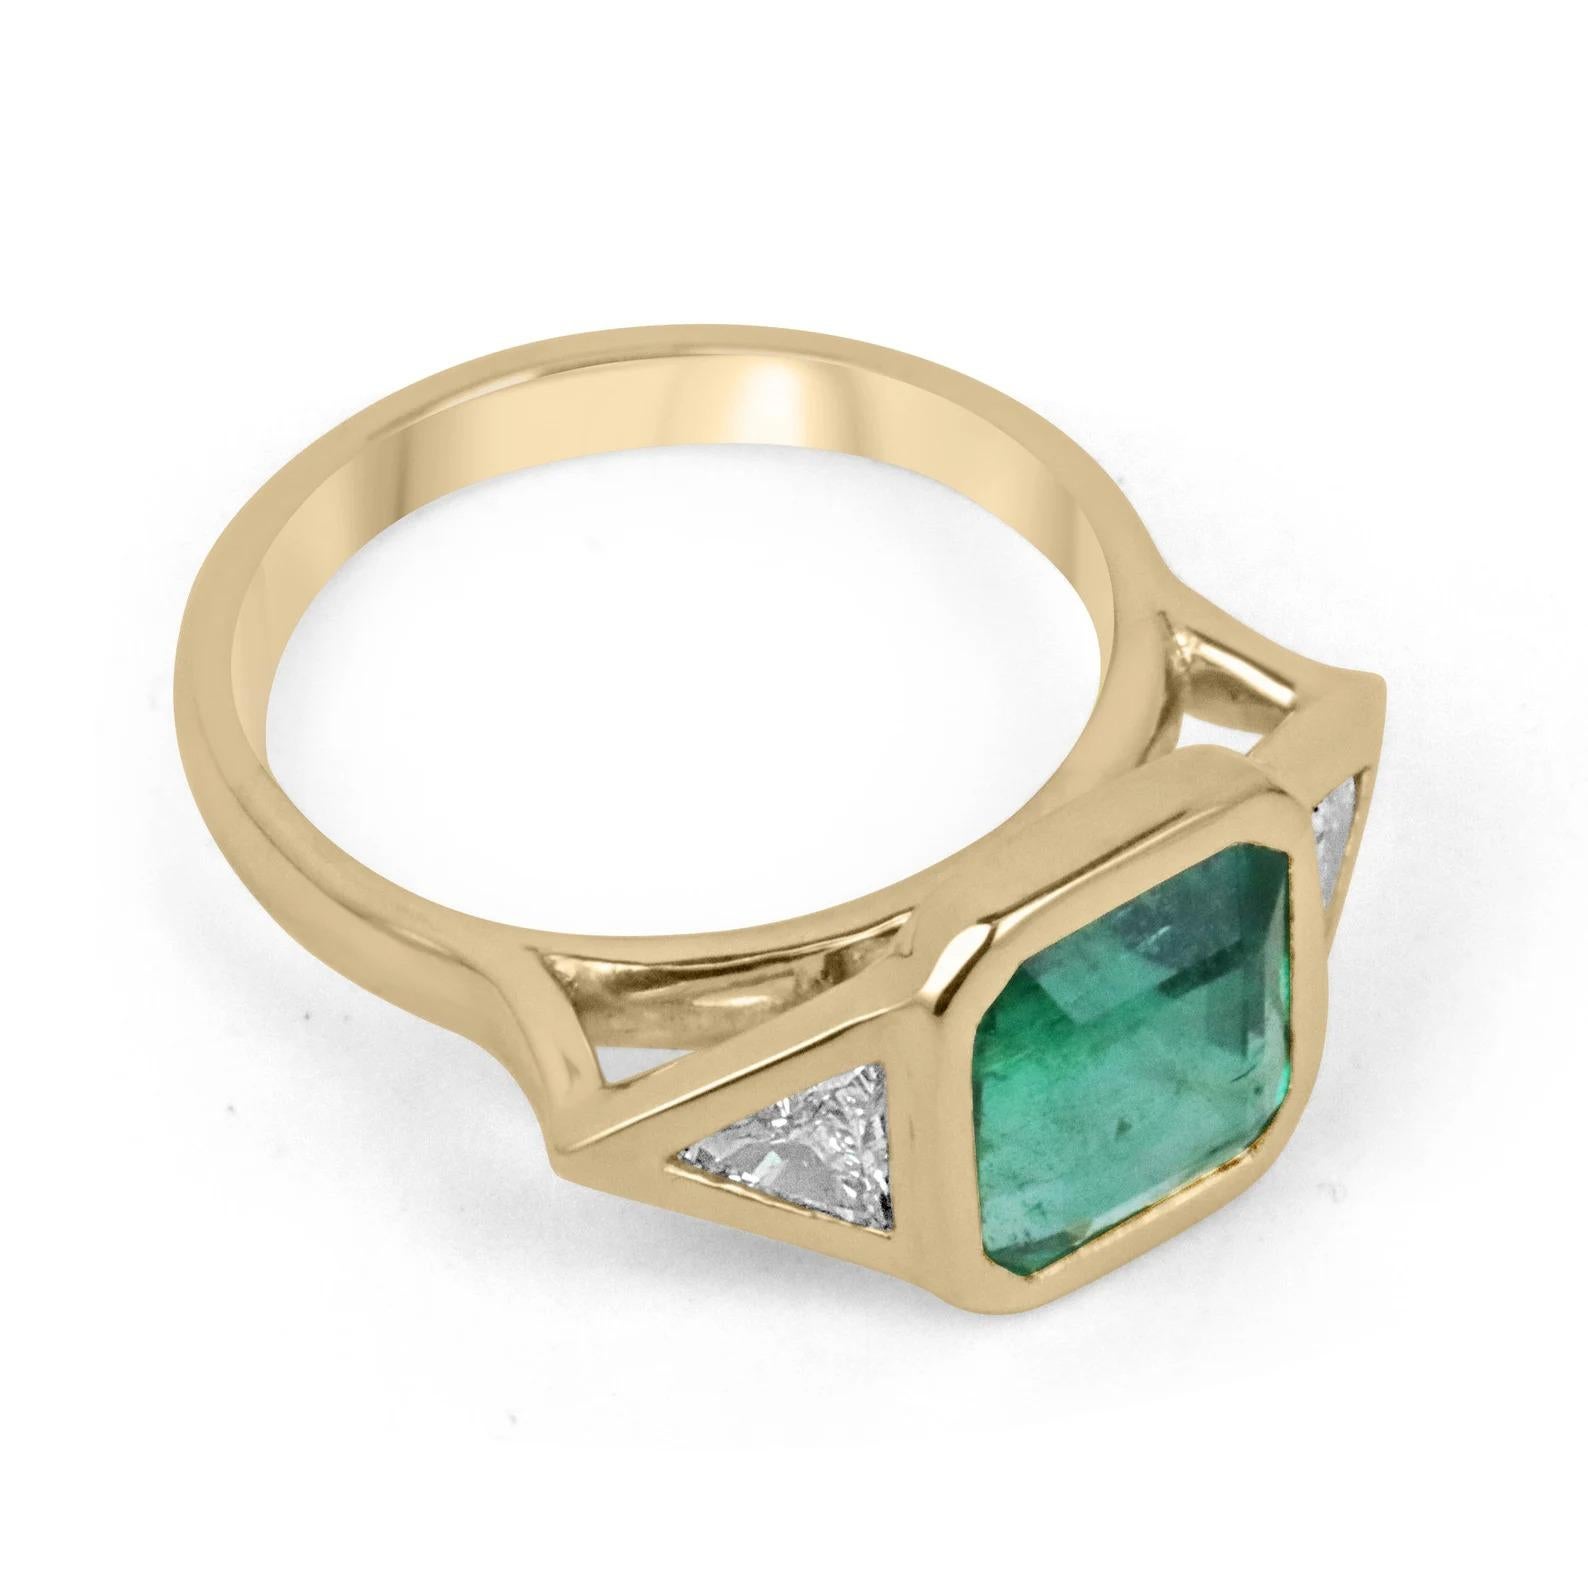 Featured here is a gorgeous HIGH quality emerald and diamond three-stone ring. The center stone is a stunning 3.26-carat, natural emerald-Asscher cut. This gemstone displays medium vivid rare green color and very good eye clarity. We designed this